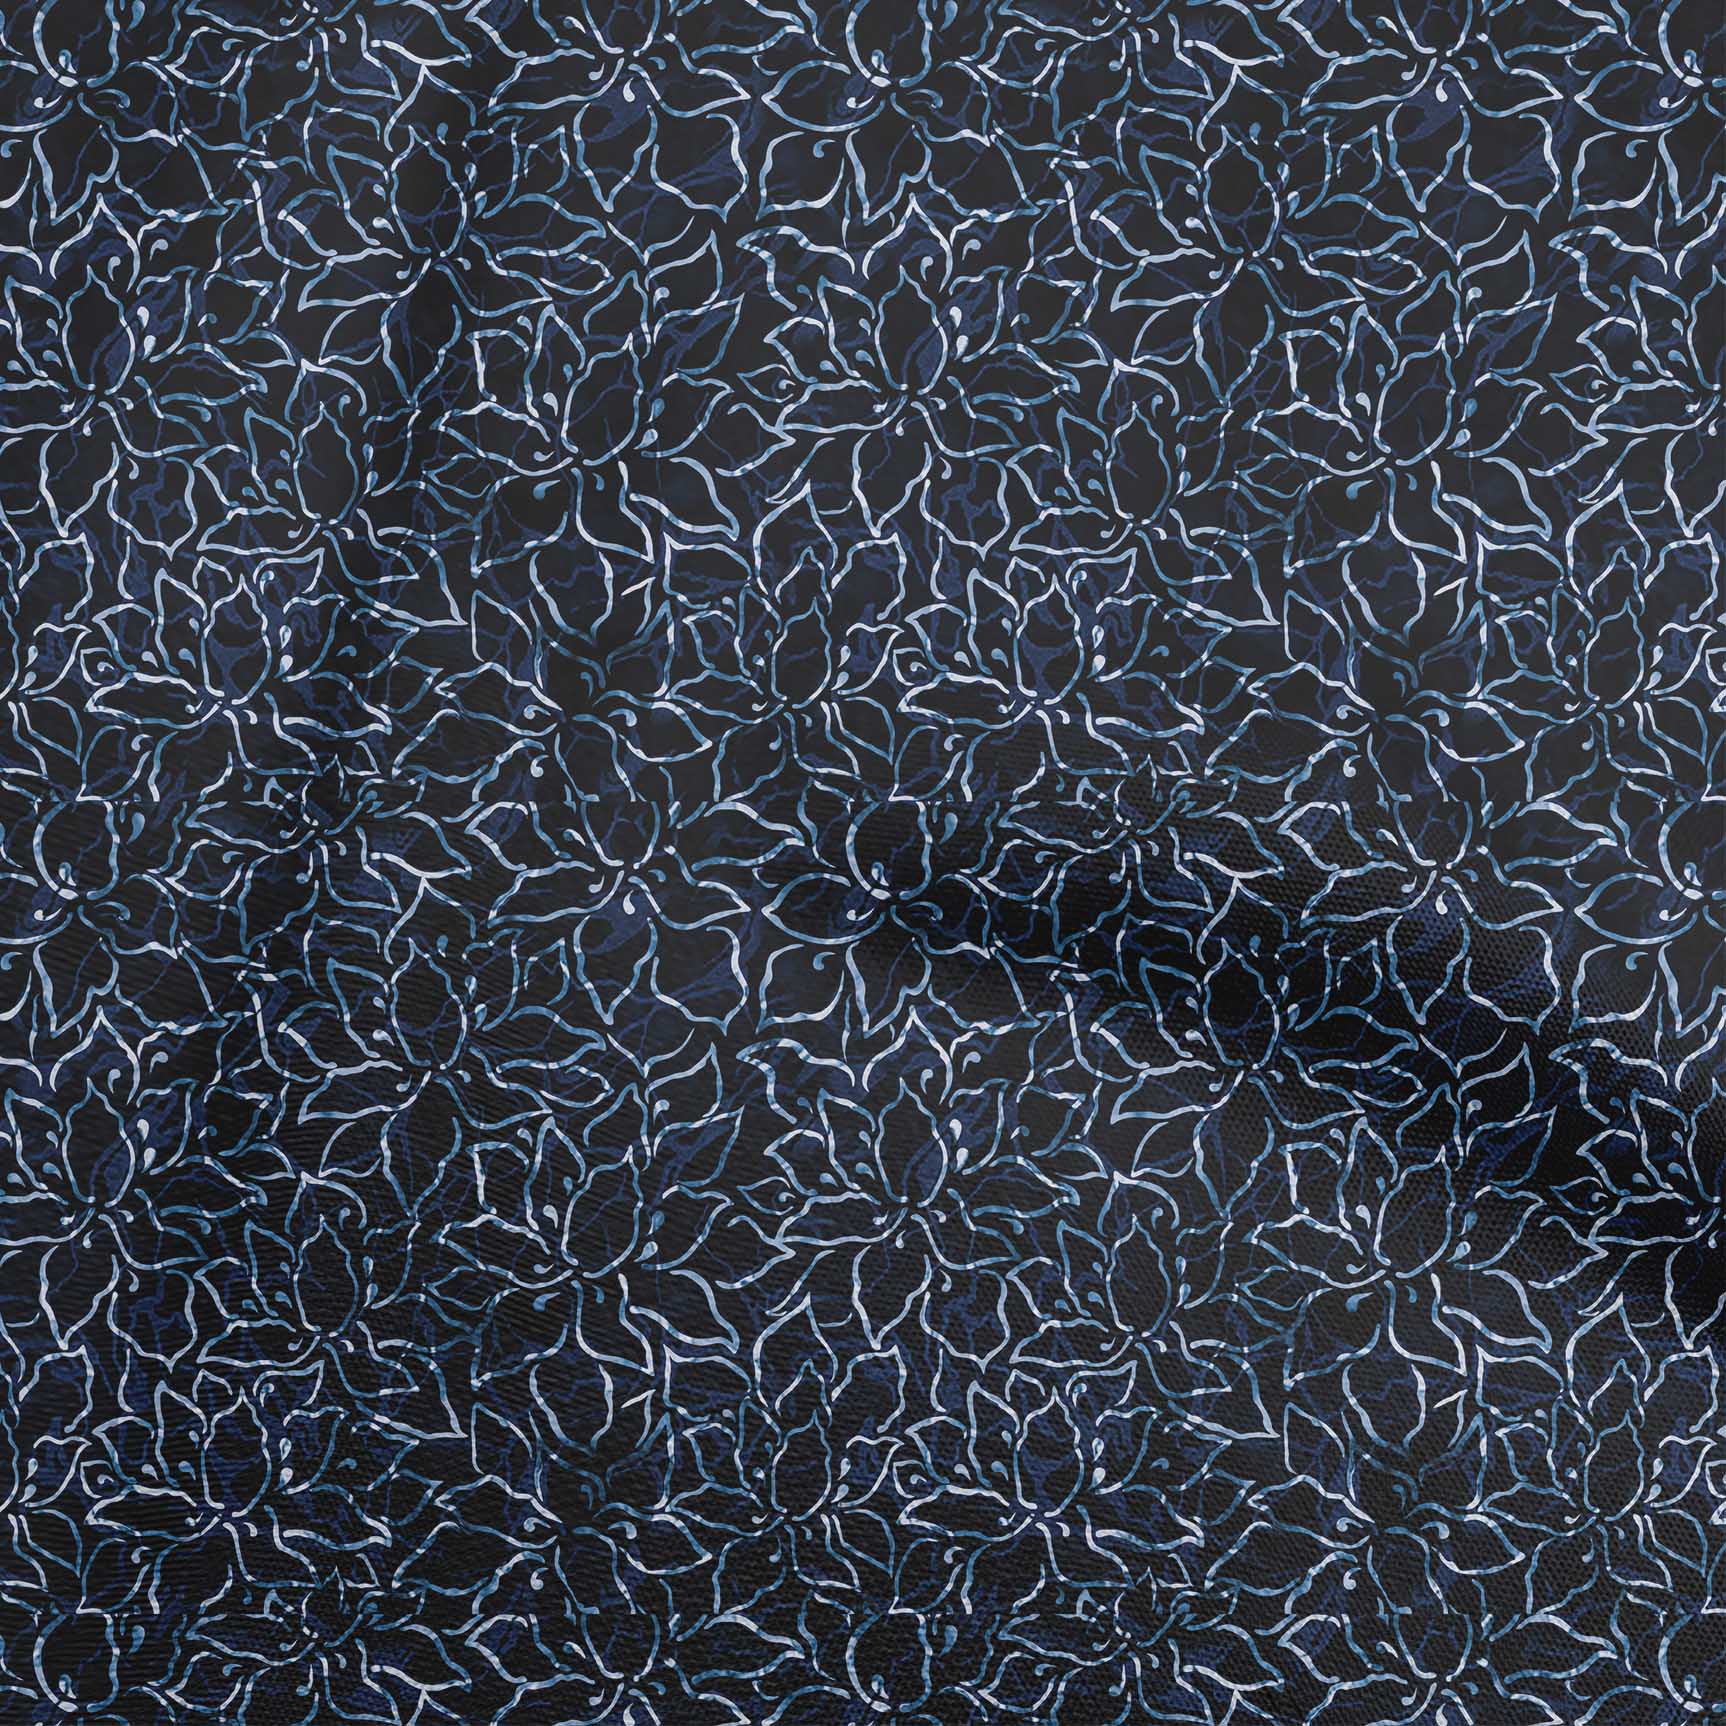 oneOone Cotton Jersey Blue Fabric Batik Fabric For Sewing Printed Craft  Fabric By The Yard 58 Inch Wide 